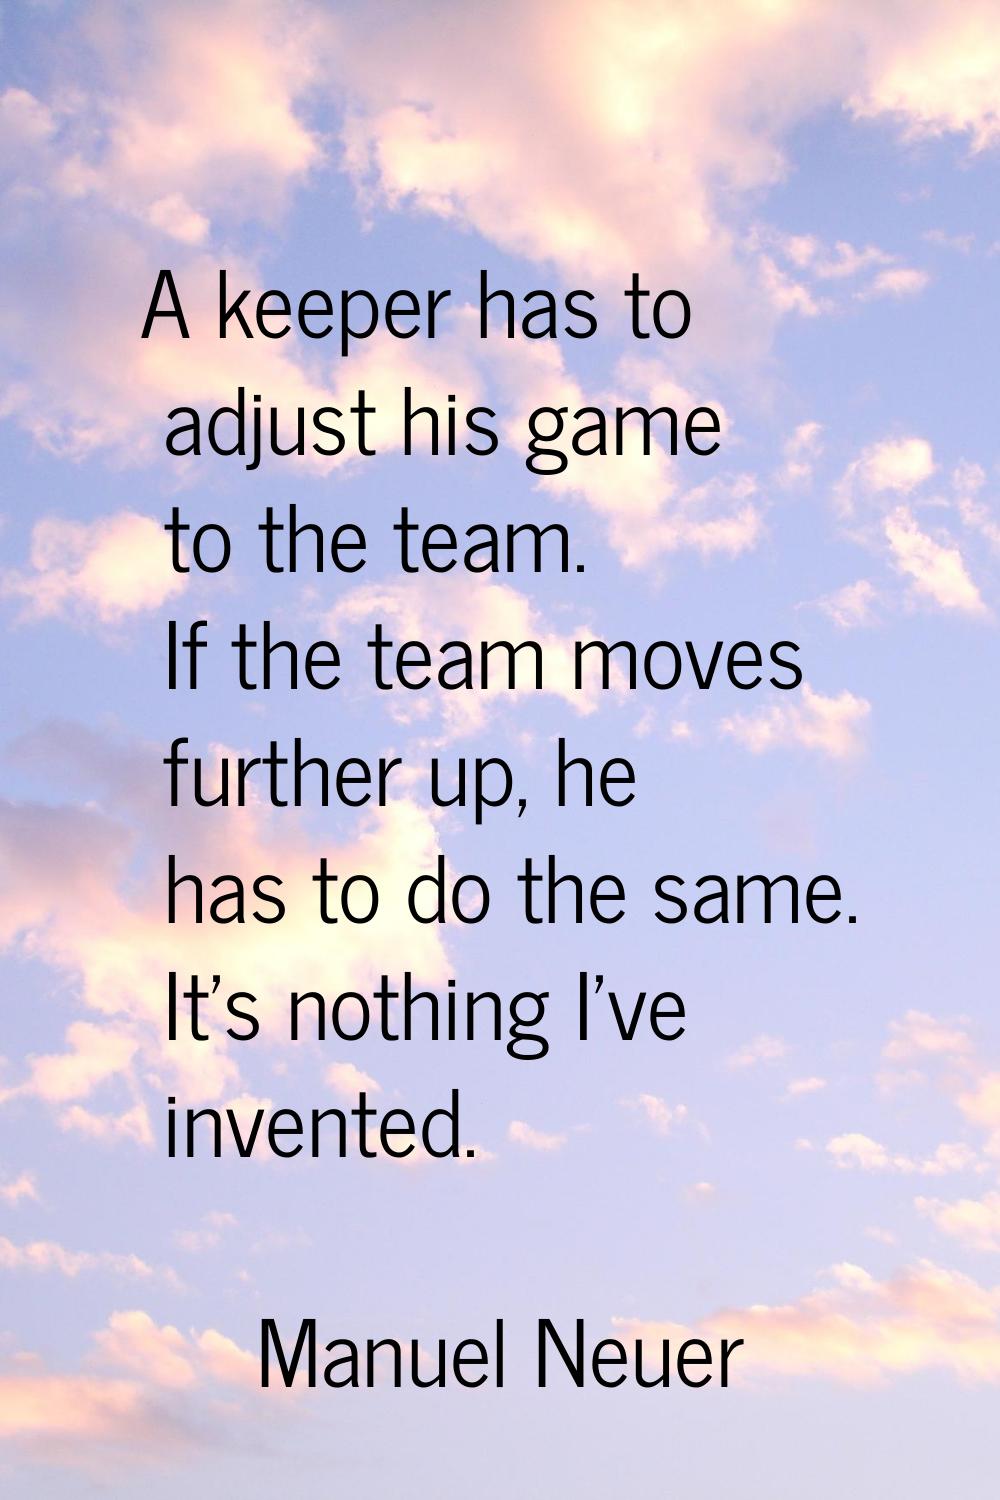 A keeper has to adjust his game to the team. If the team moves further up, he has to do the same. I